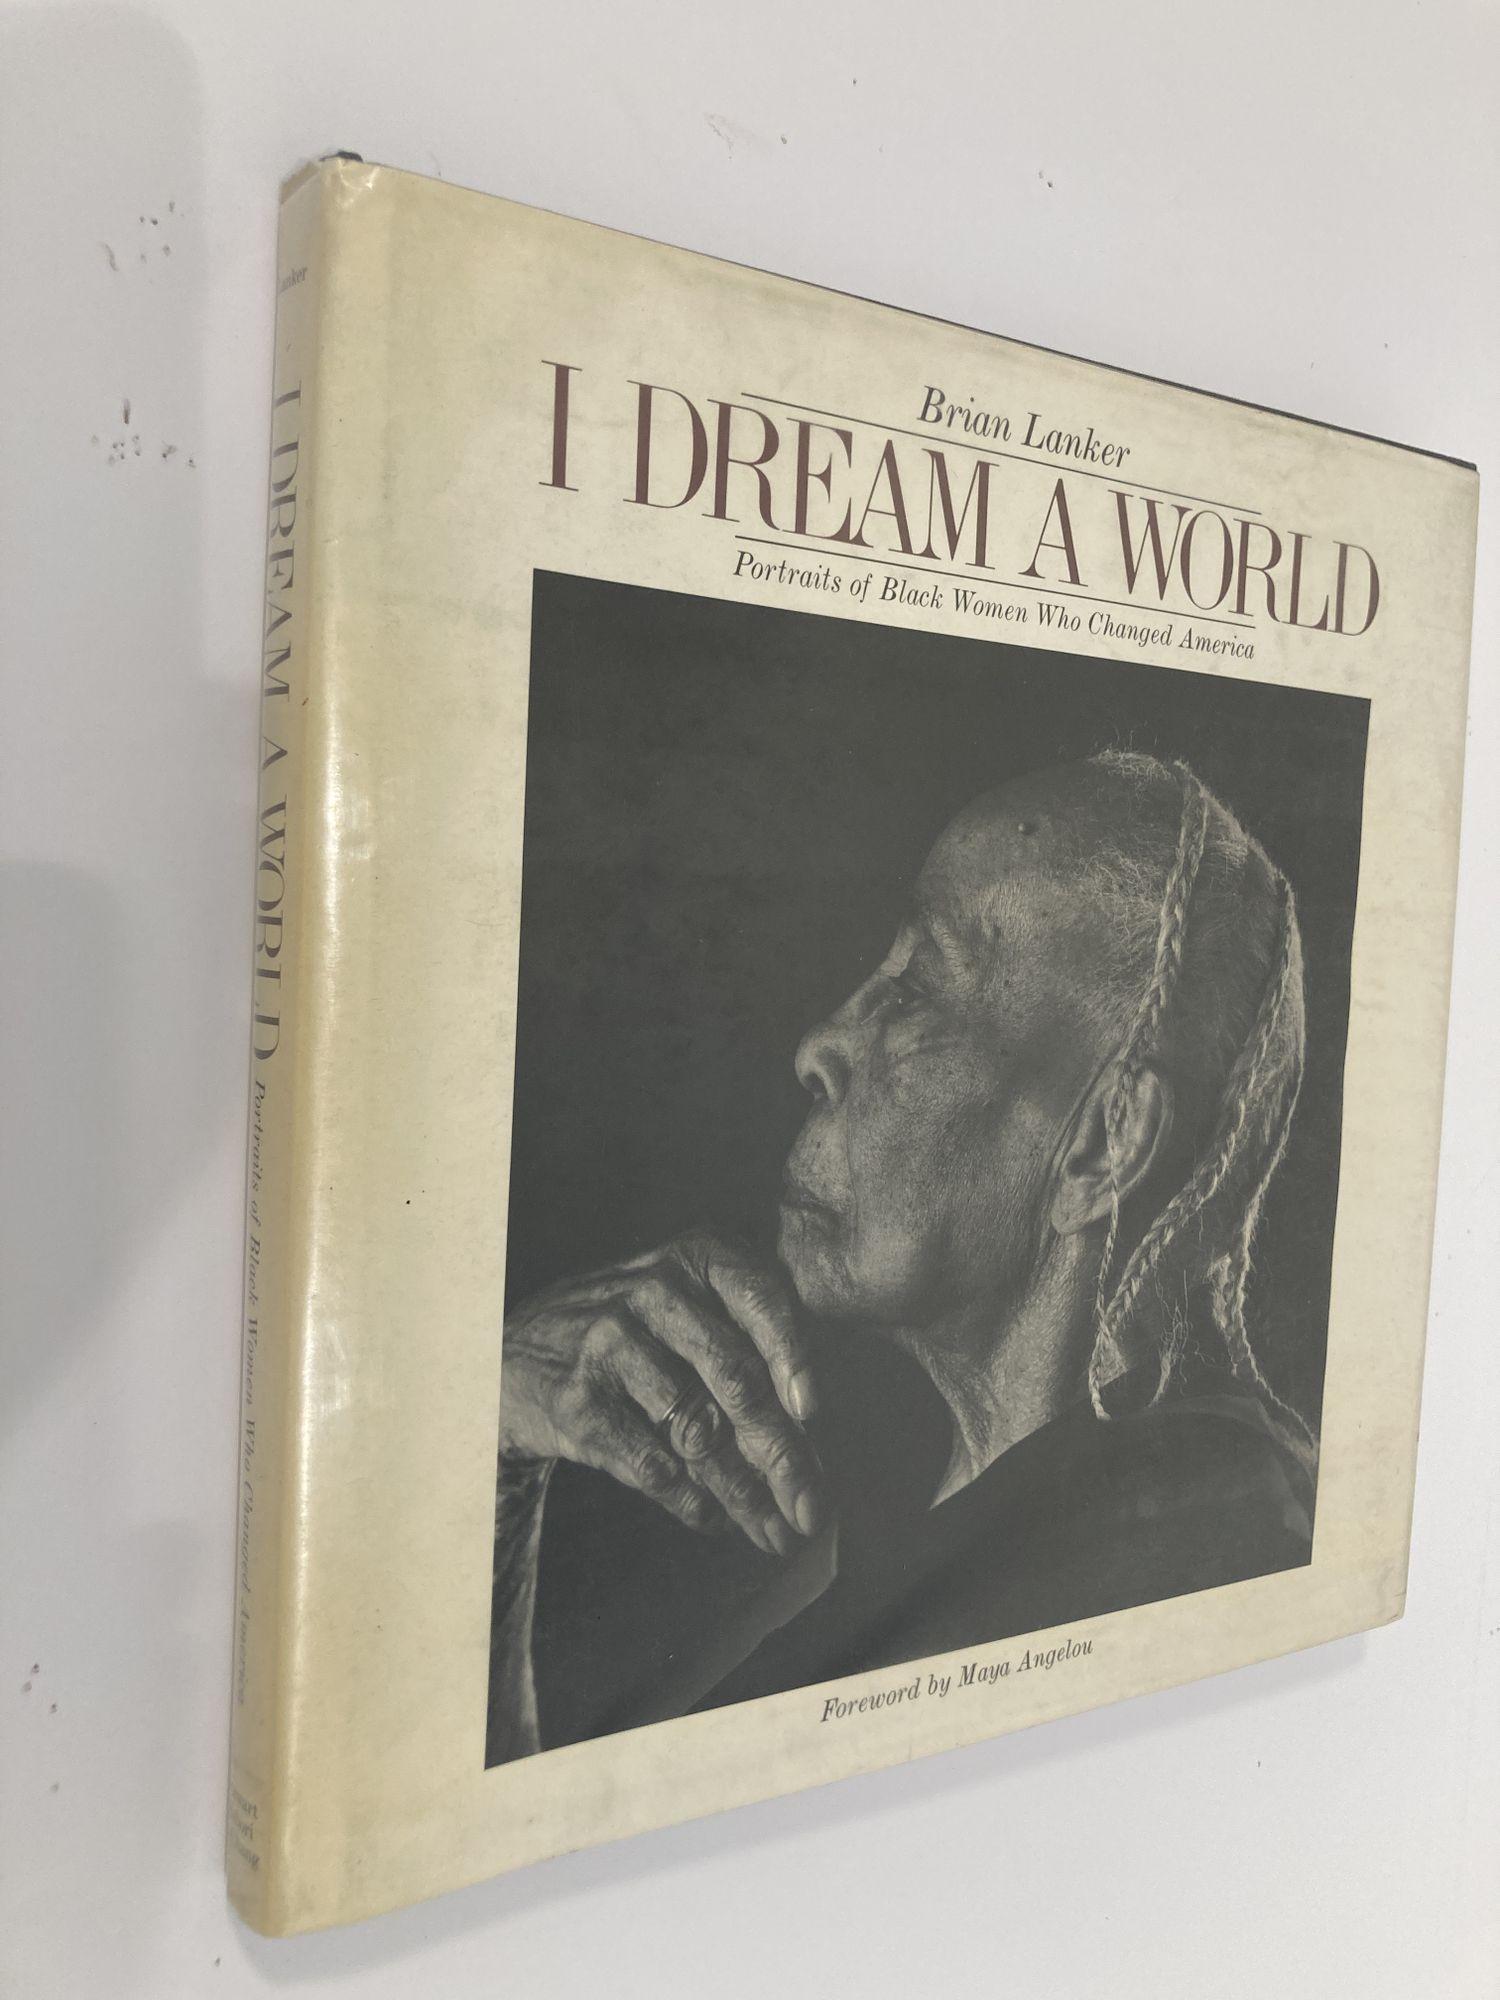 I Dream a World: Portraits of Black Women Who Changed America.
Photographs and interviews by Brian Lanker; foreword by Maya Angelou; edited by Barbara Summer.
Title: I Dream a World: Portraits of Black Women
Publisher: N.Y.: Stewart, Tabori &